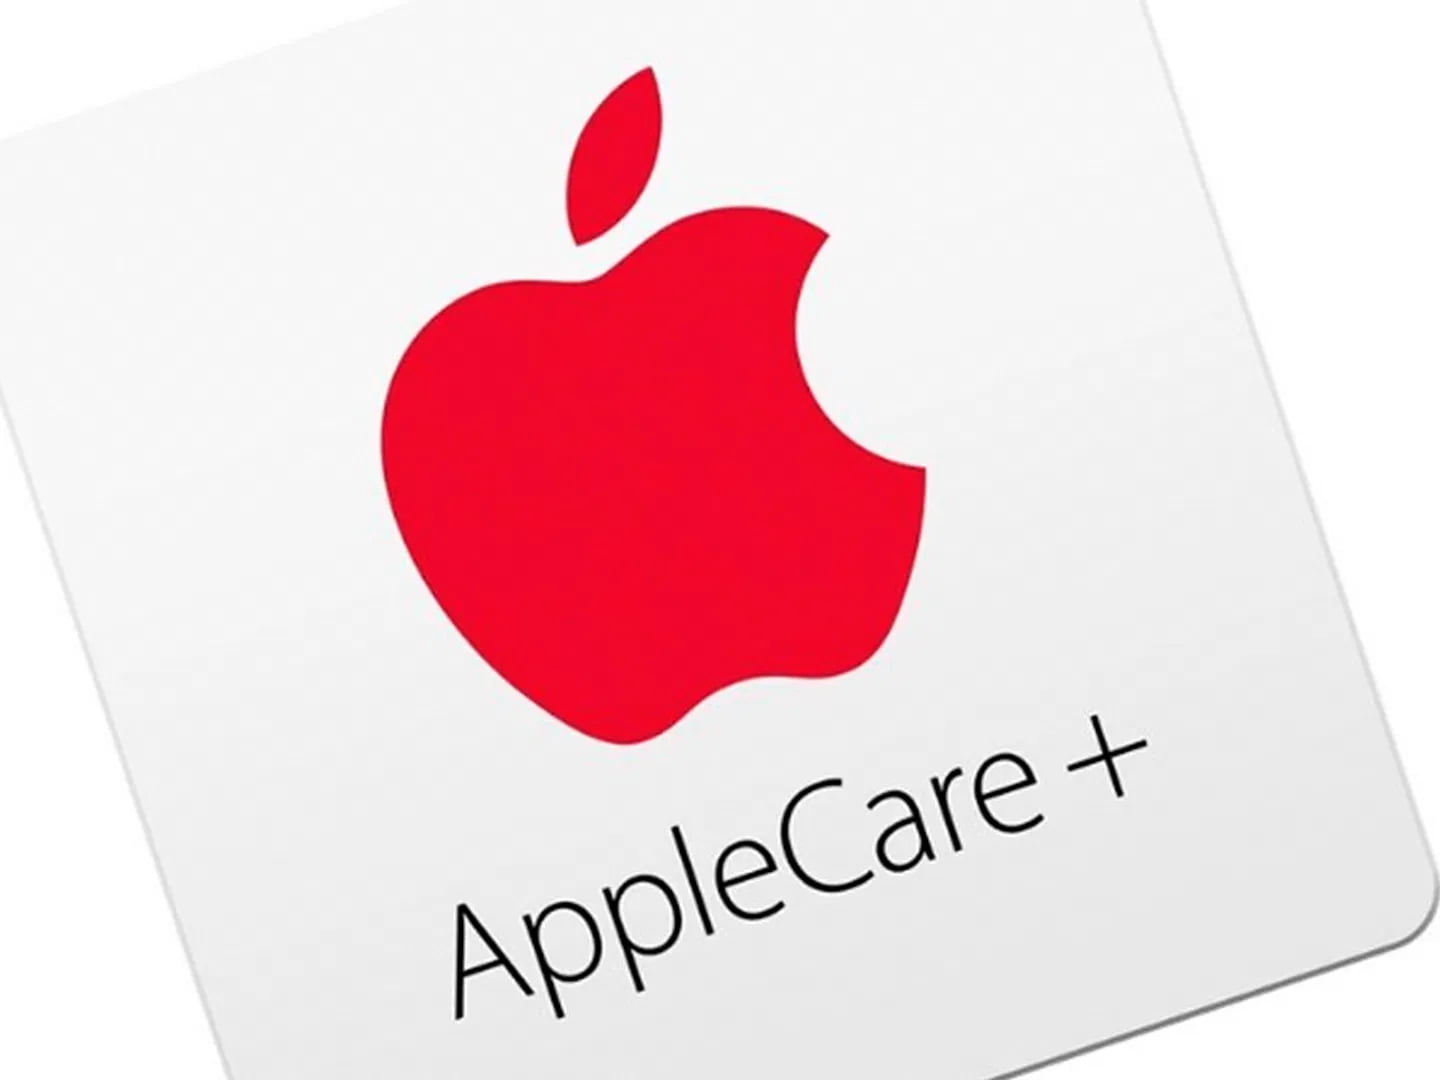 You can get AppleCare after you iPhone was repaired 